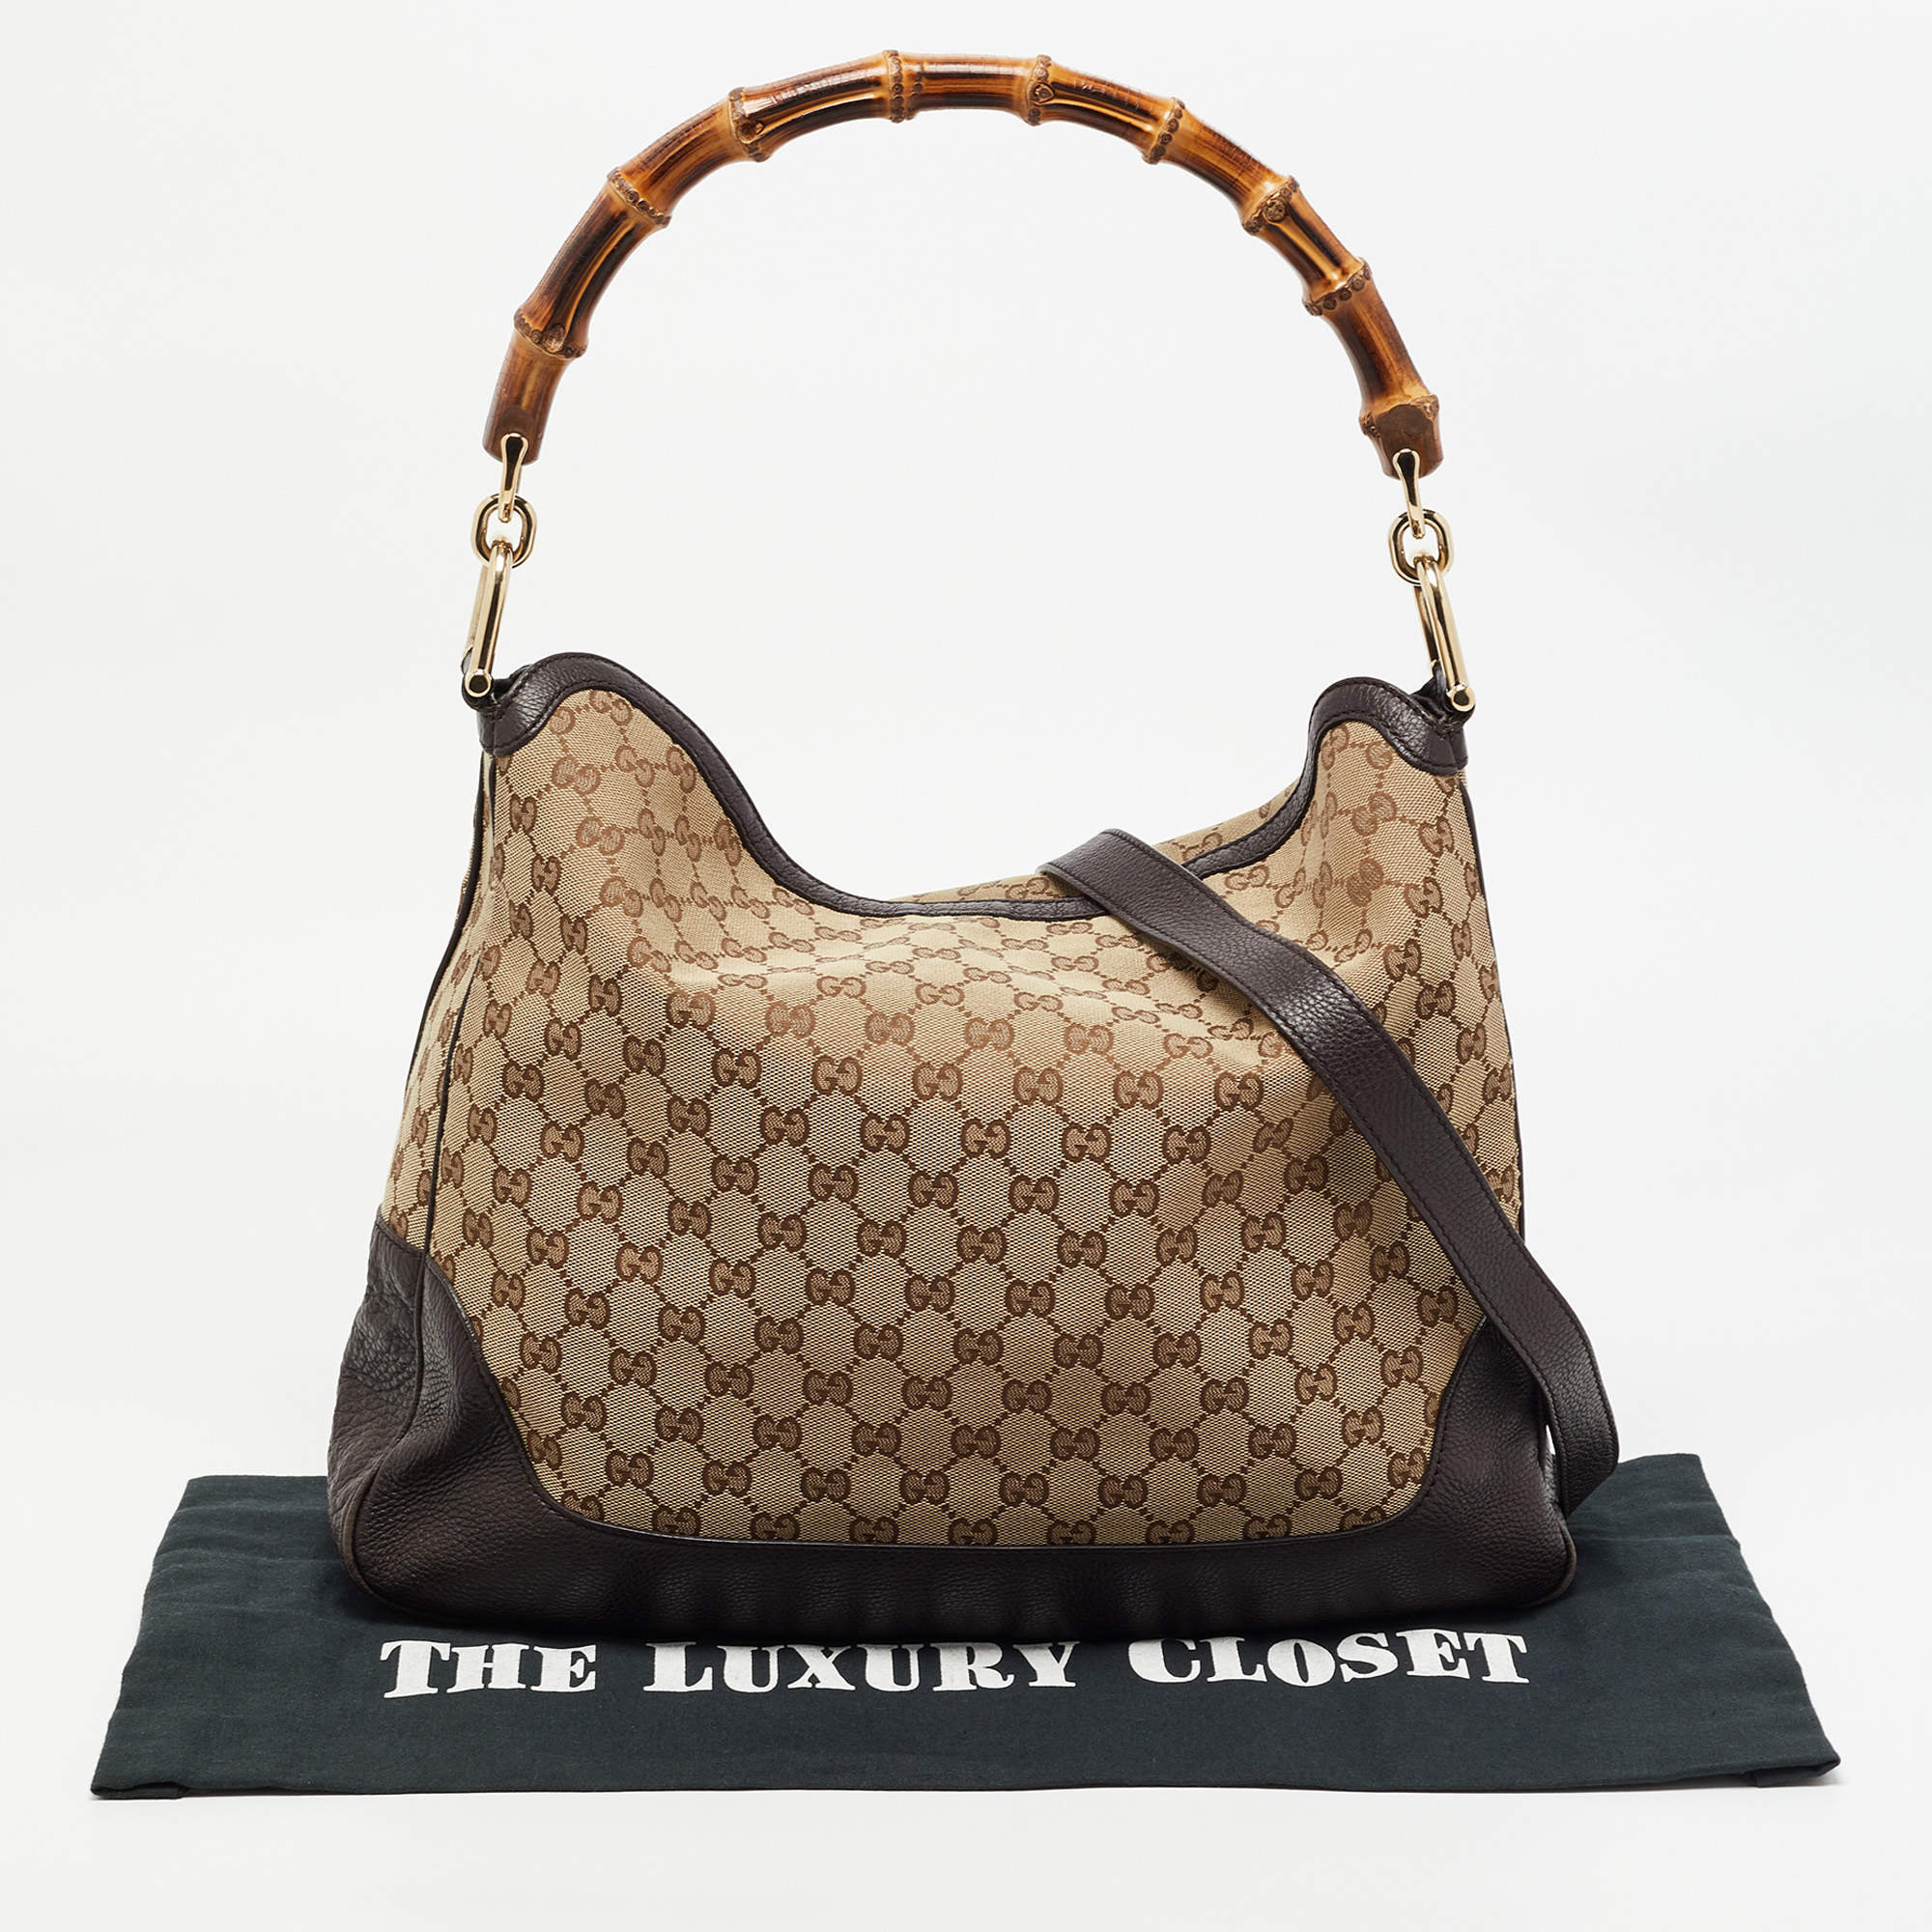 Made in USA Louis Vuitton Bags: Does Country of Origin matter in Luxury?